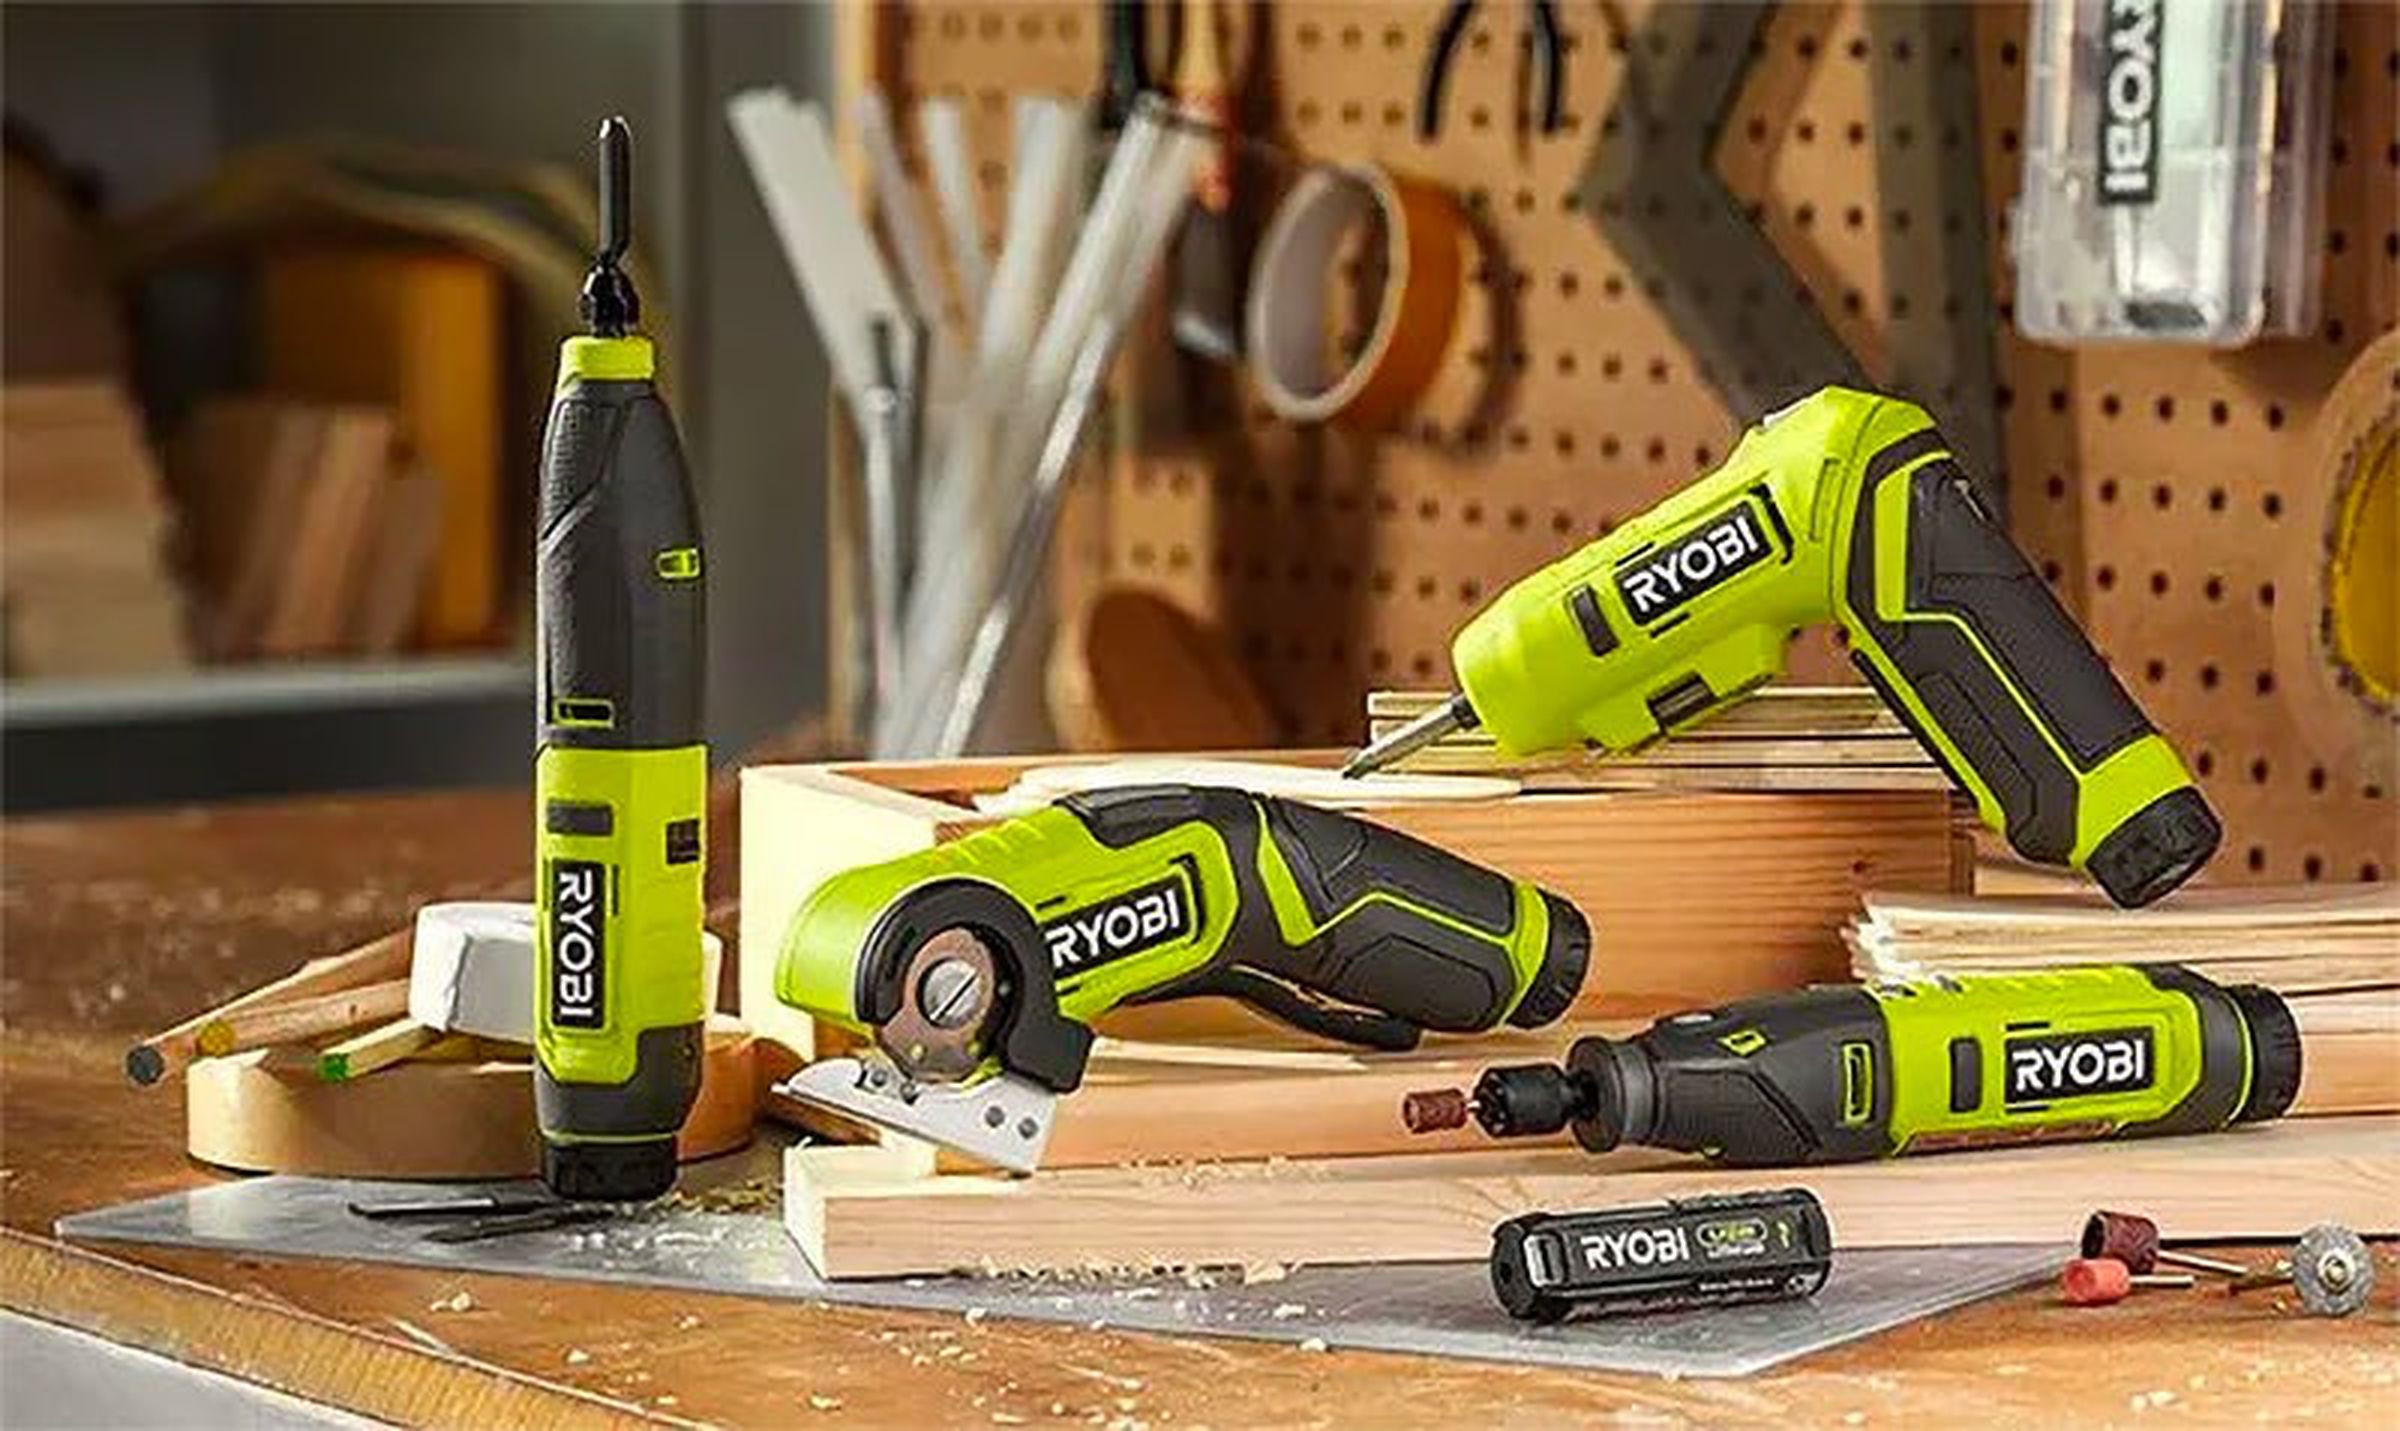 Ryobi’s USB Lithium lineup includes a Dremel-alike, a power carver, a power cutter, and a cordless screwdriver.